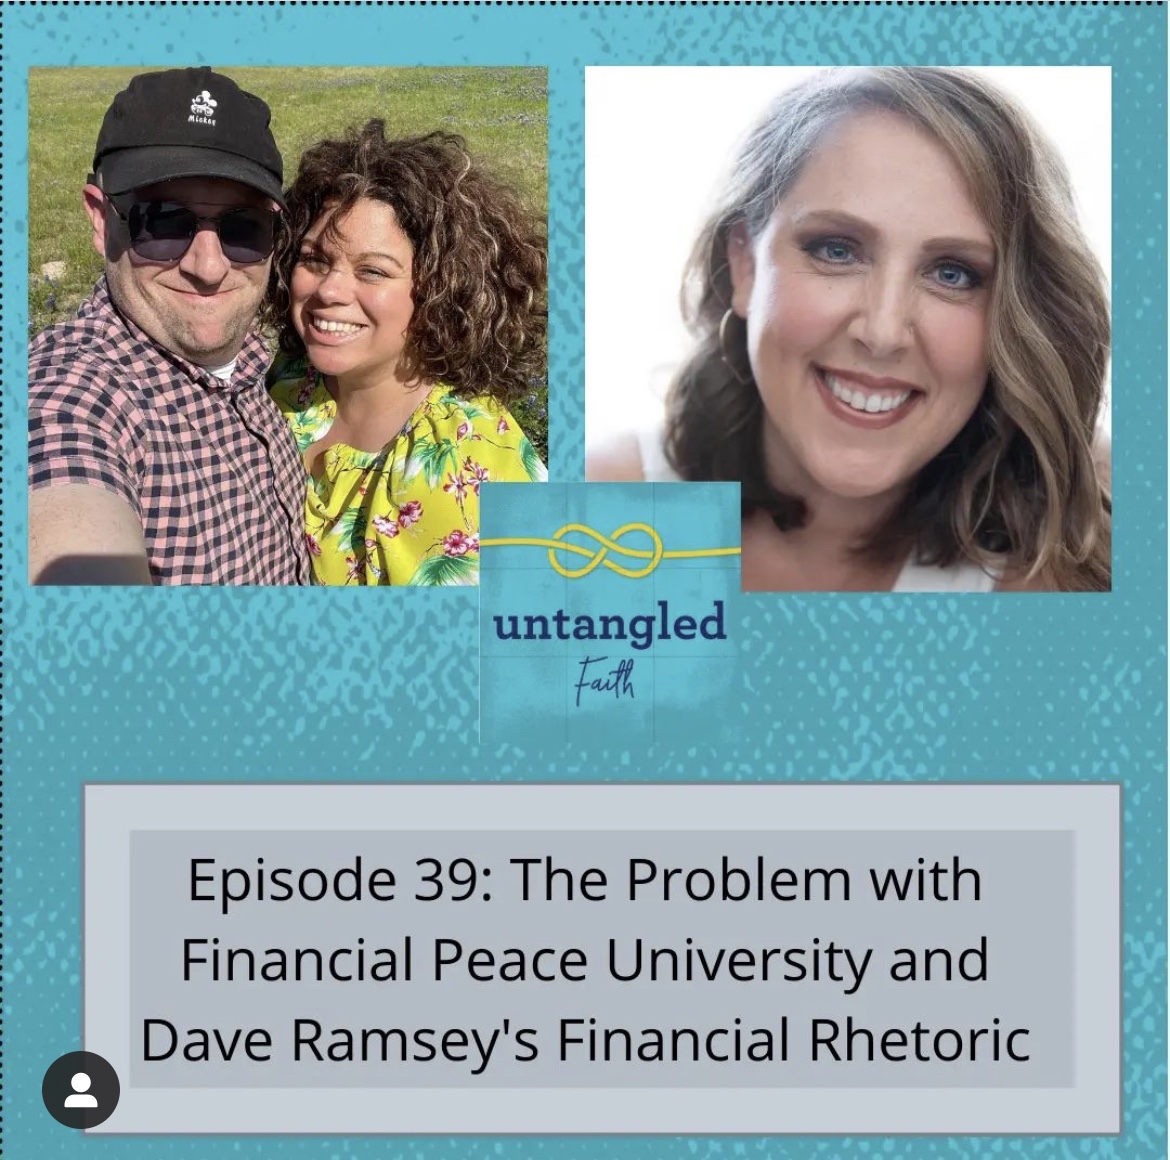 Does Dave Ramsey really have “God’s plan” for money?